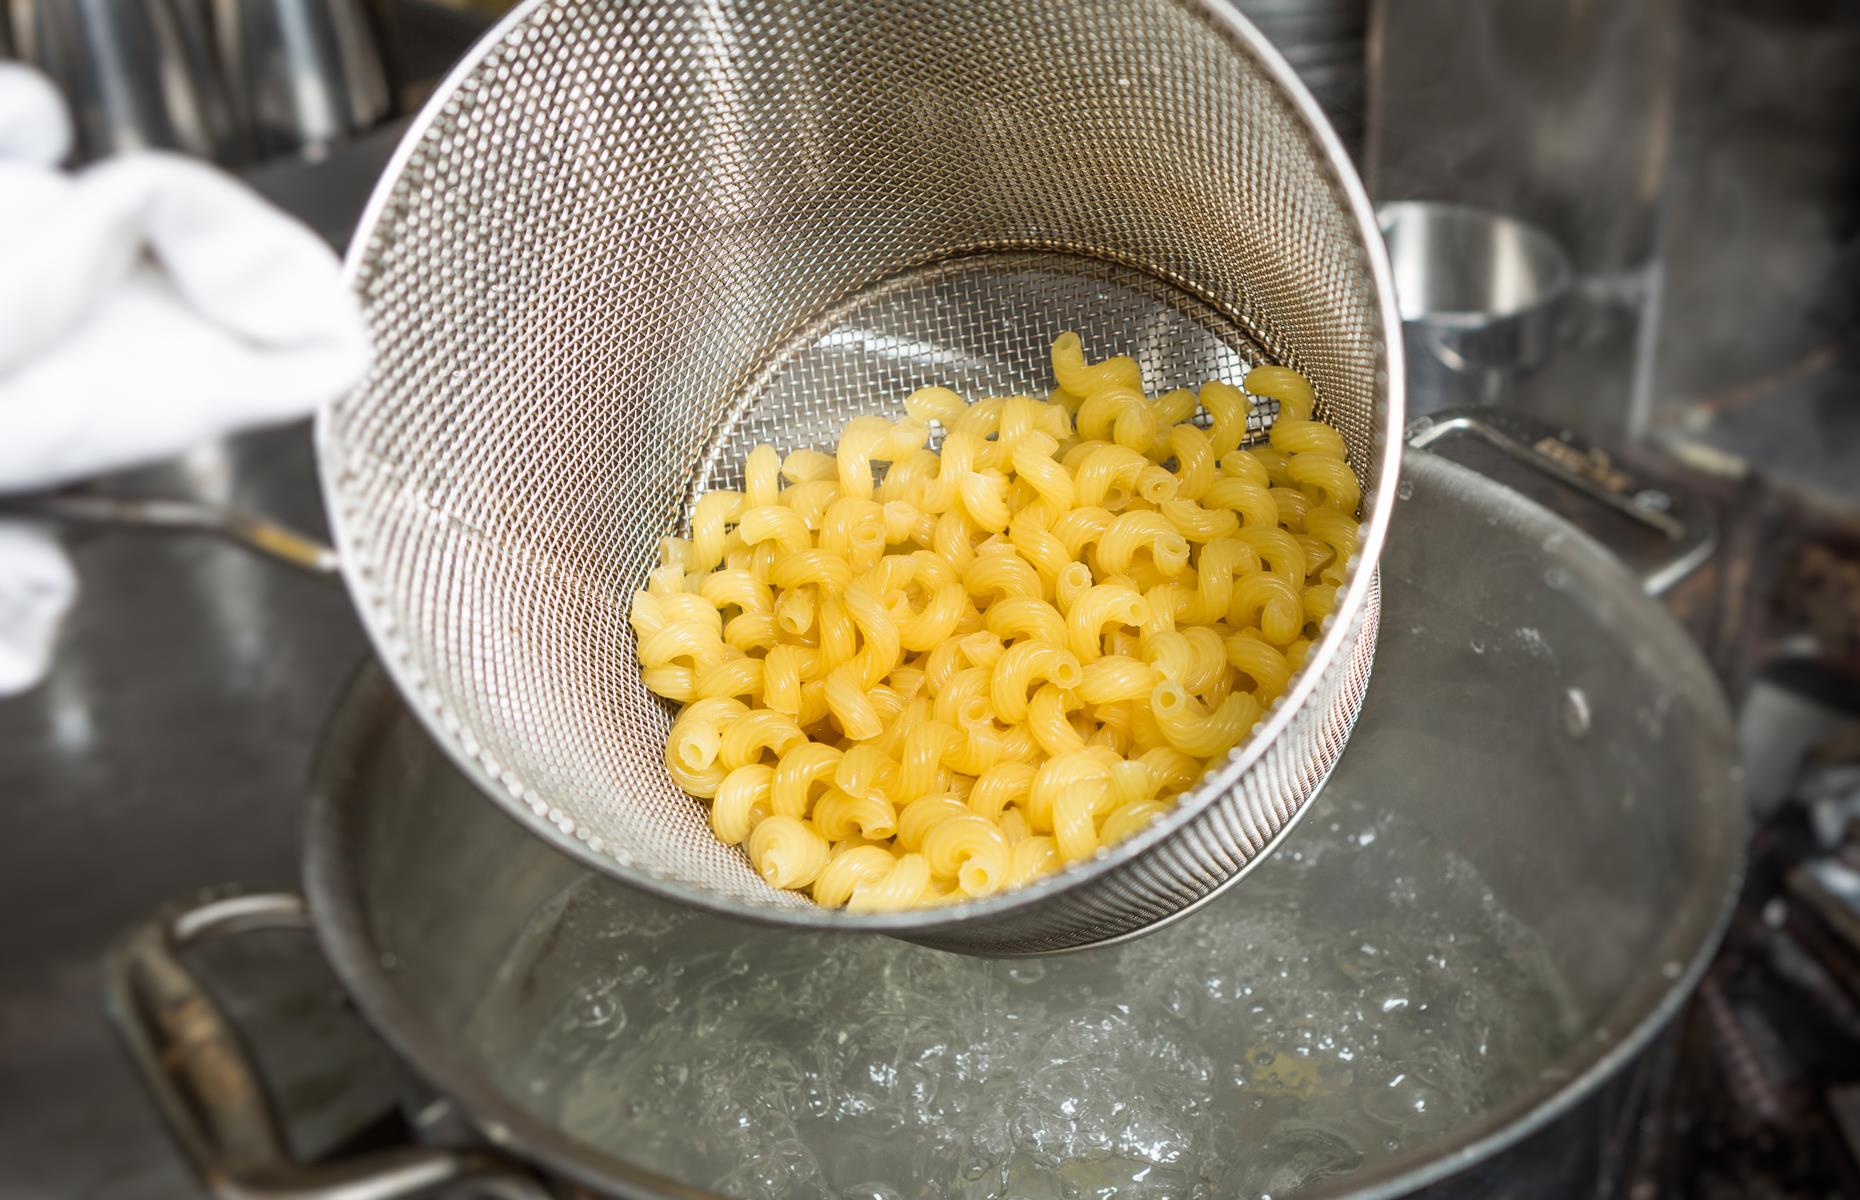 Macaroni should be cooked in a large pan of boiling salted water for around eight minutes (though packet instructions vary). It's smaller than some pasta shapes, so you won’t need long if you're aiming for al dente, which is firm cooked pasta.